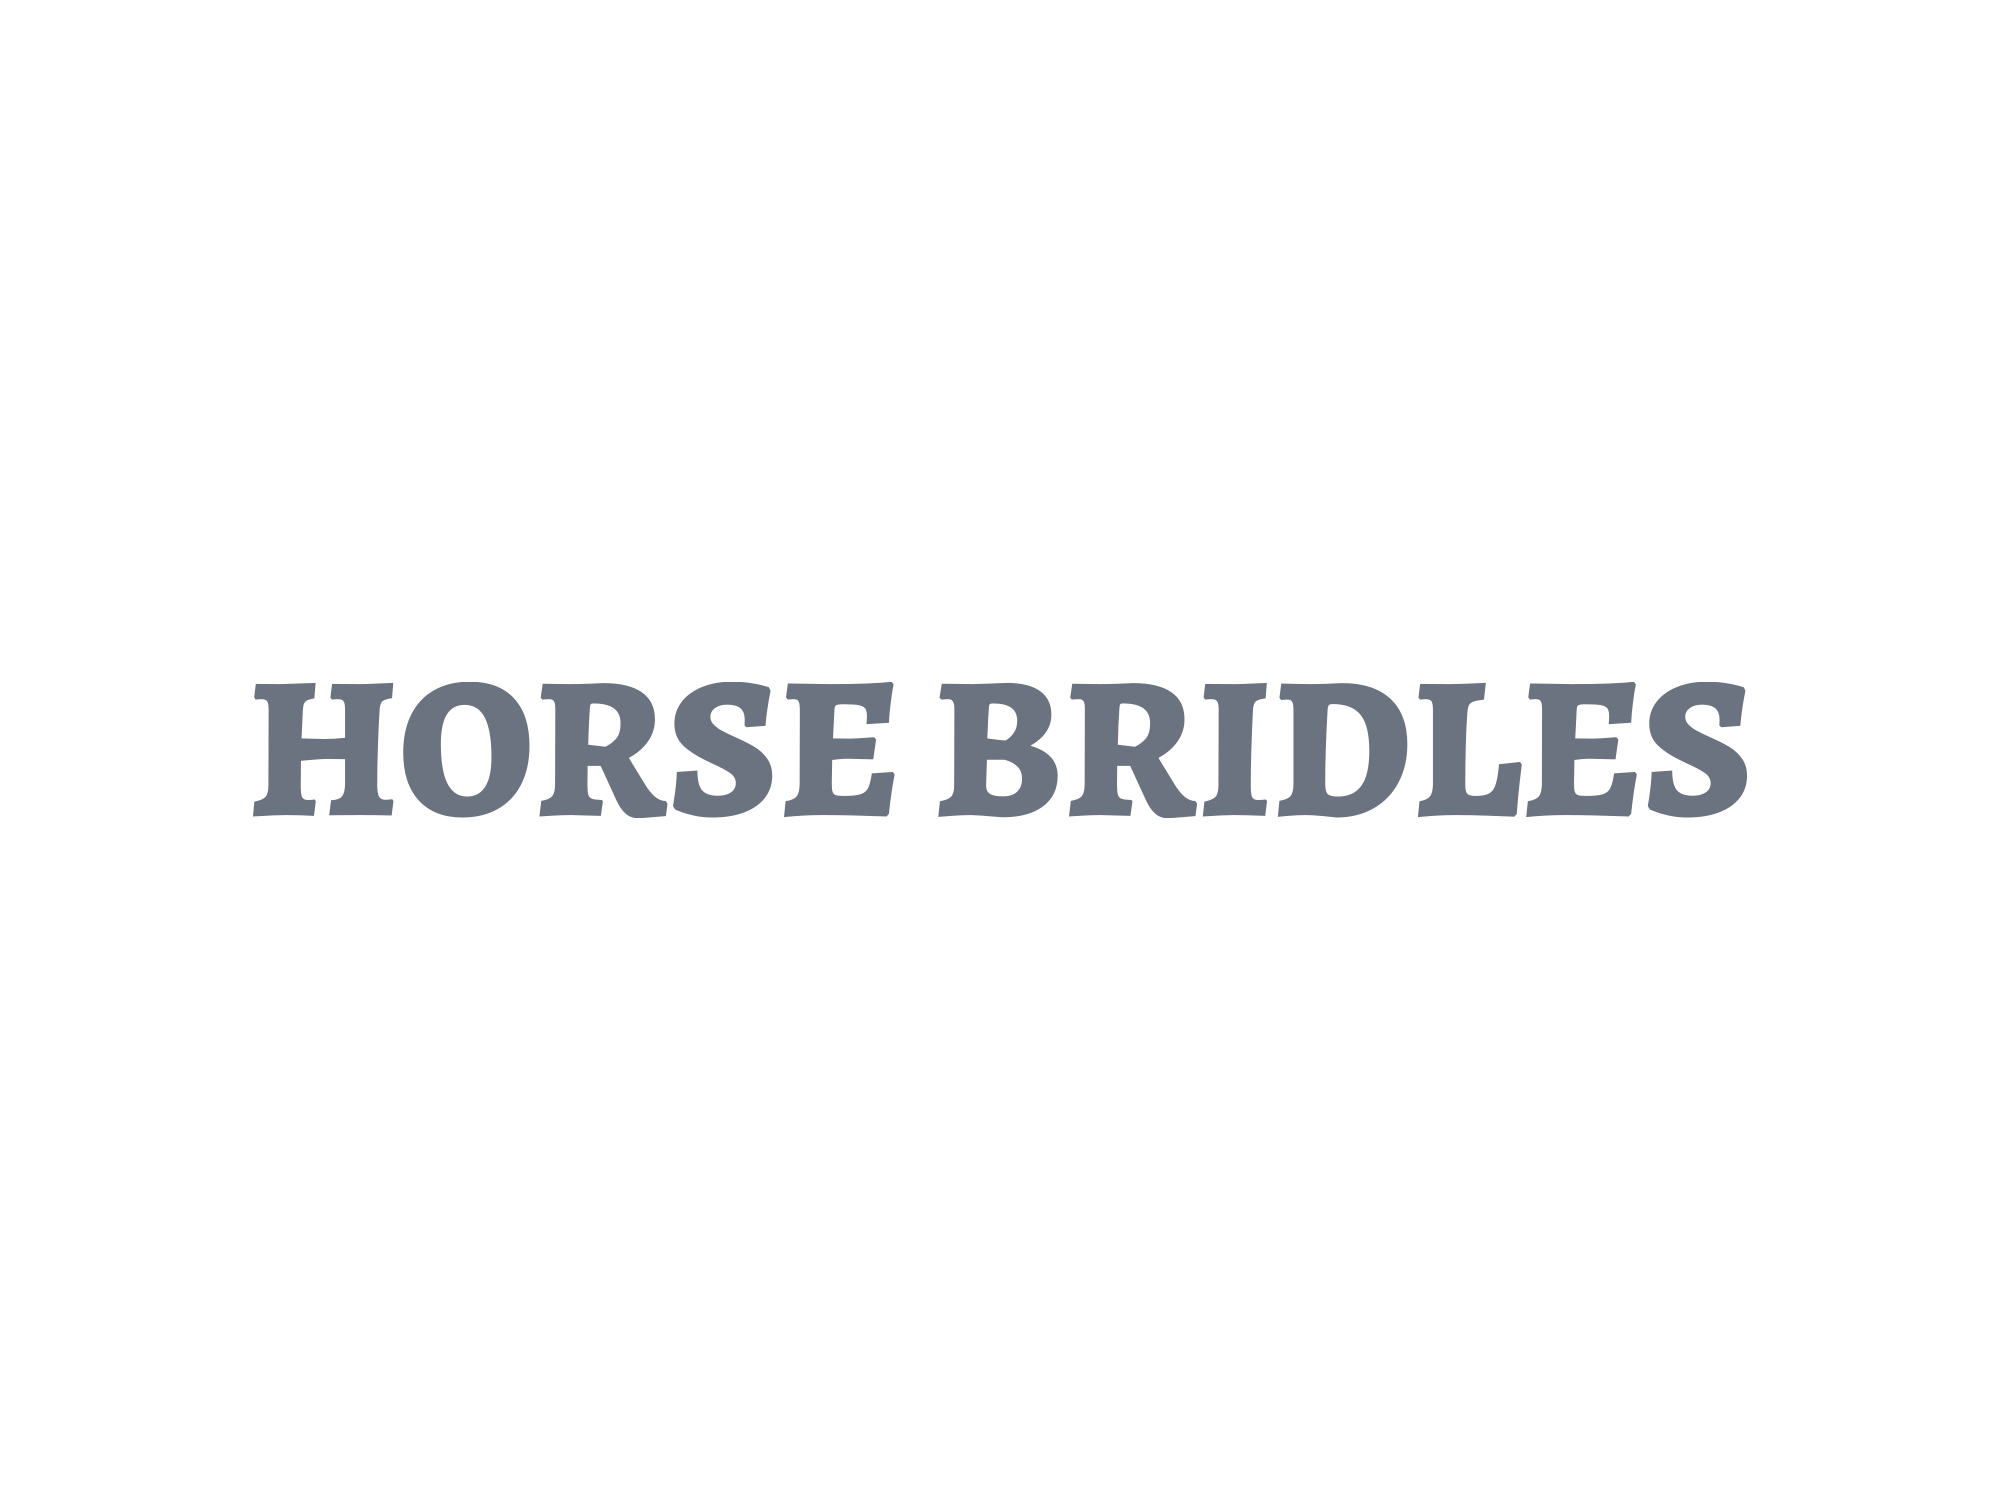 A beginners Guide to Horse Bridles